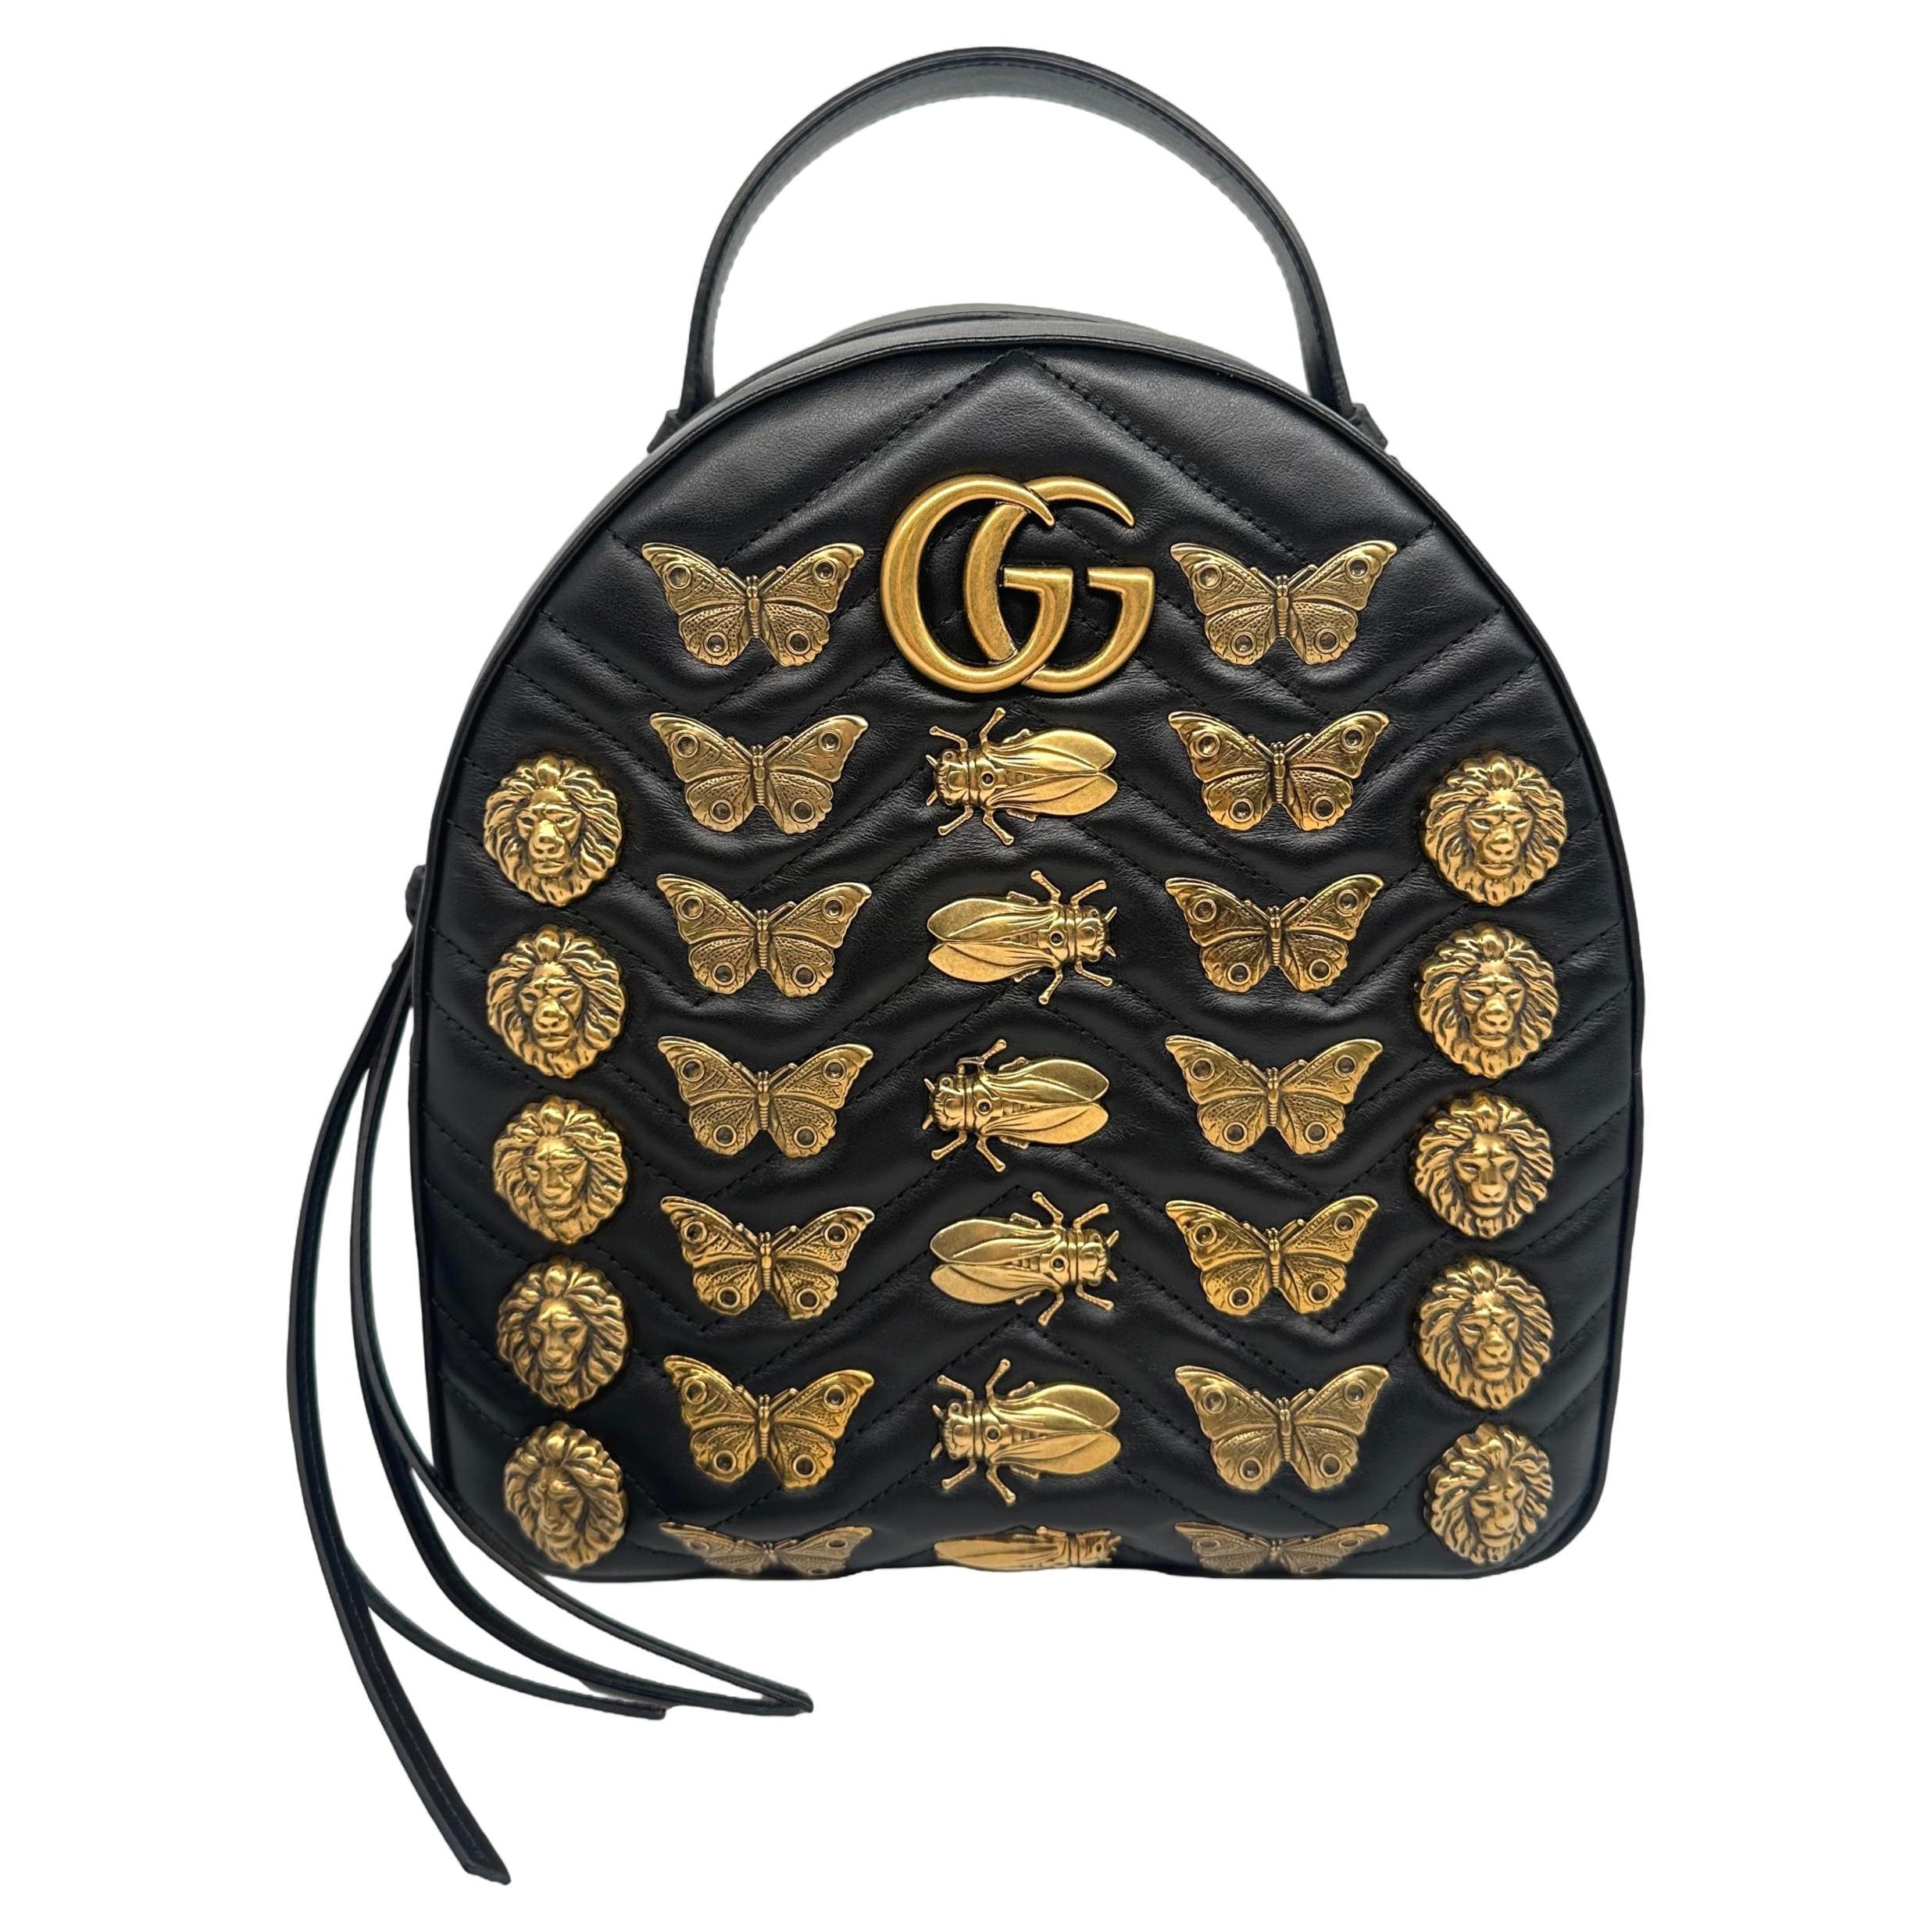 Gucci Black Calfskin Matelassé Leather Animal Studded GG Marmont Backpack, 2017. For Sale